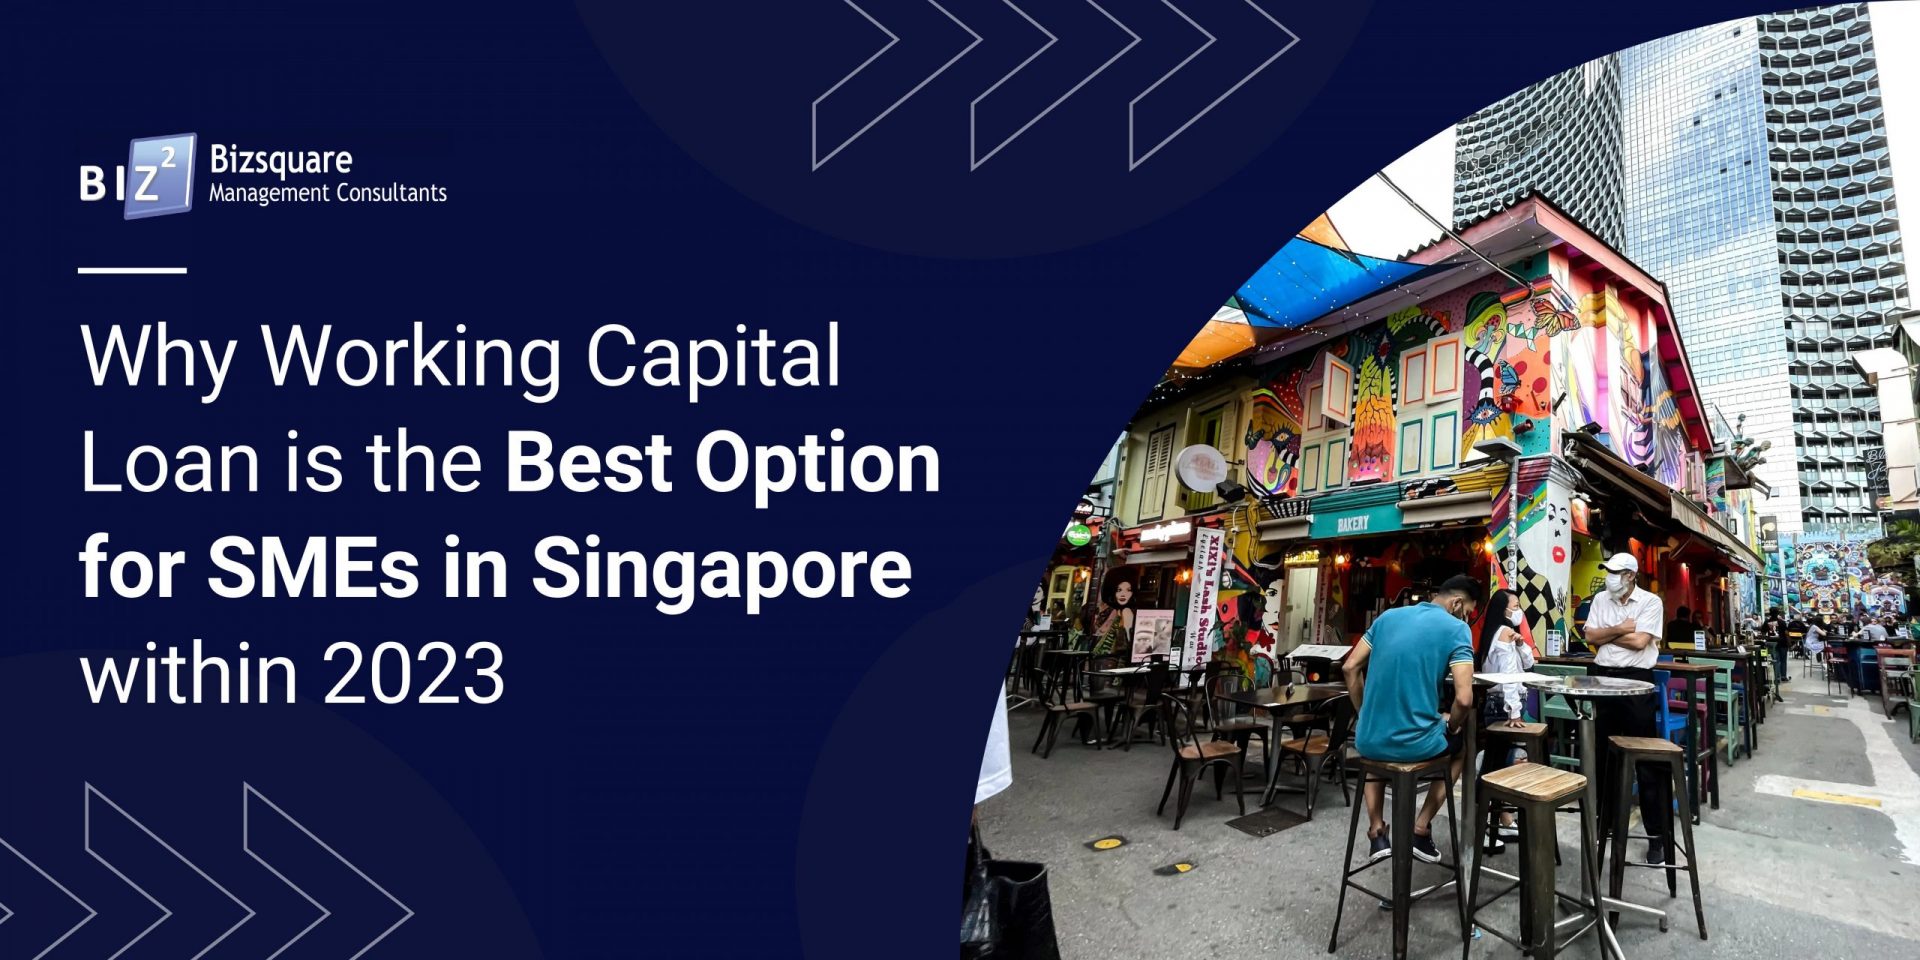 Why Working Capital Loan is the Best Option for SMEs in Singapore within 2023